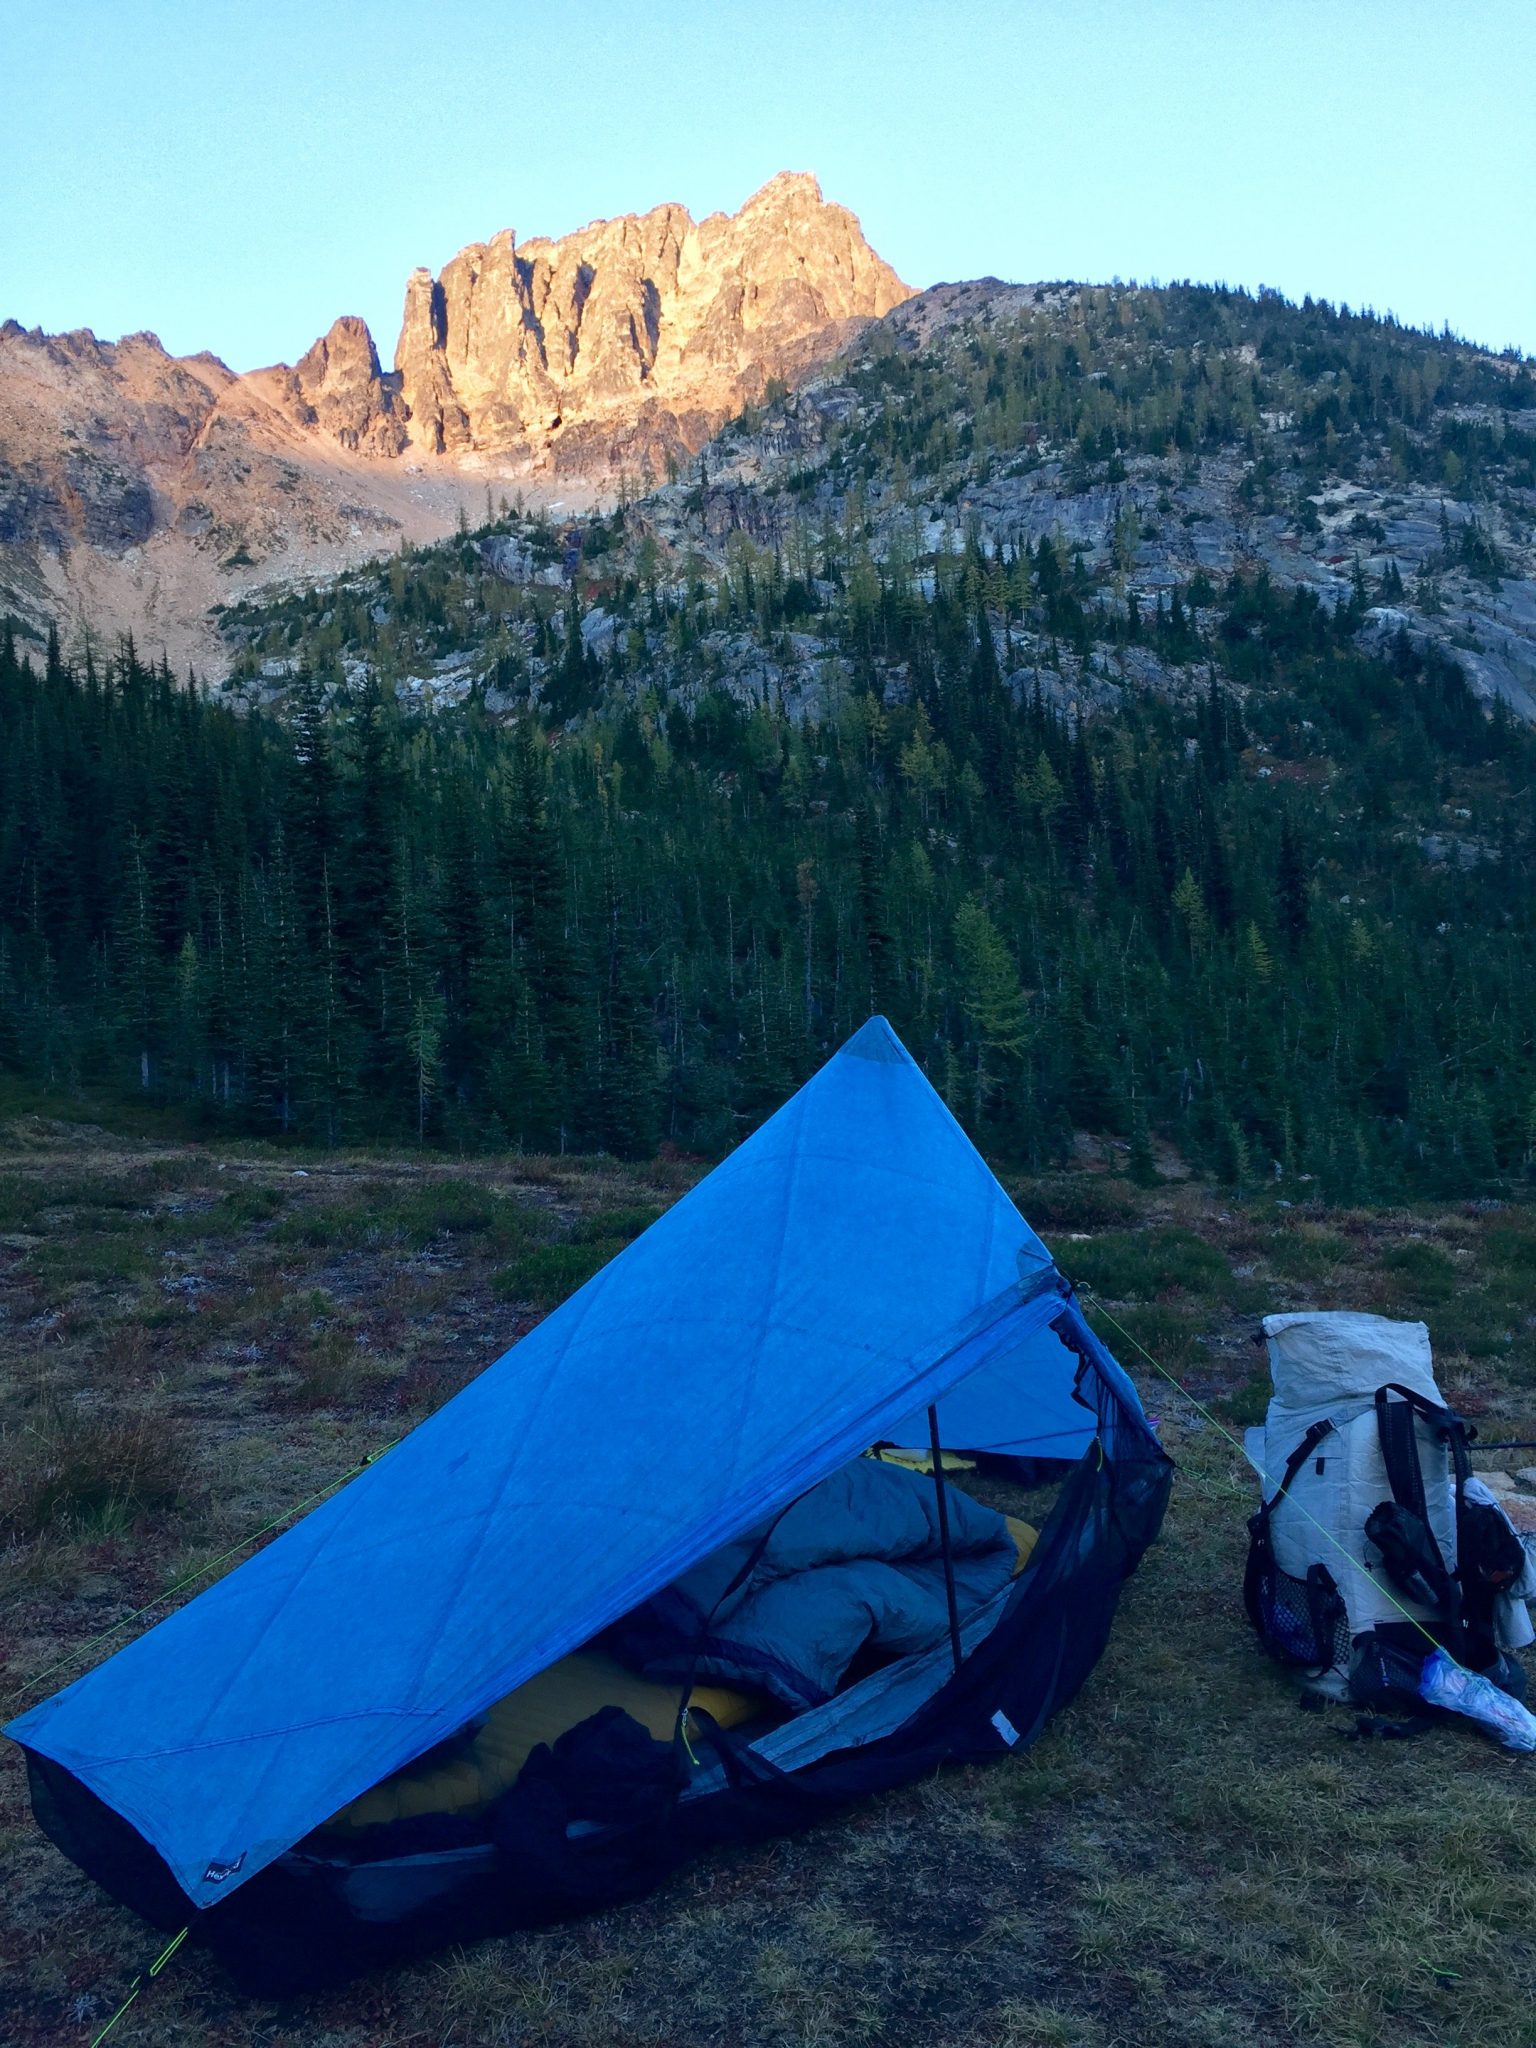 Tent pitched in an alpine meadow along the PCT